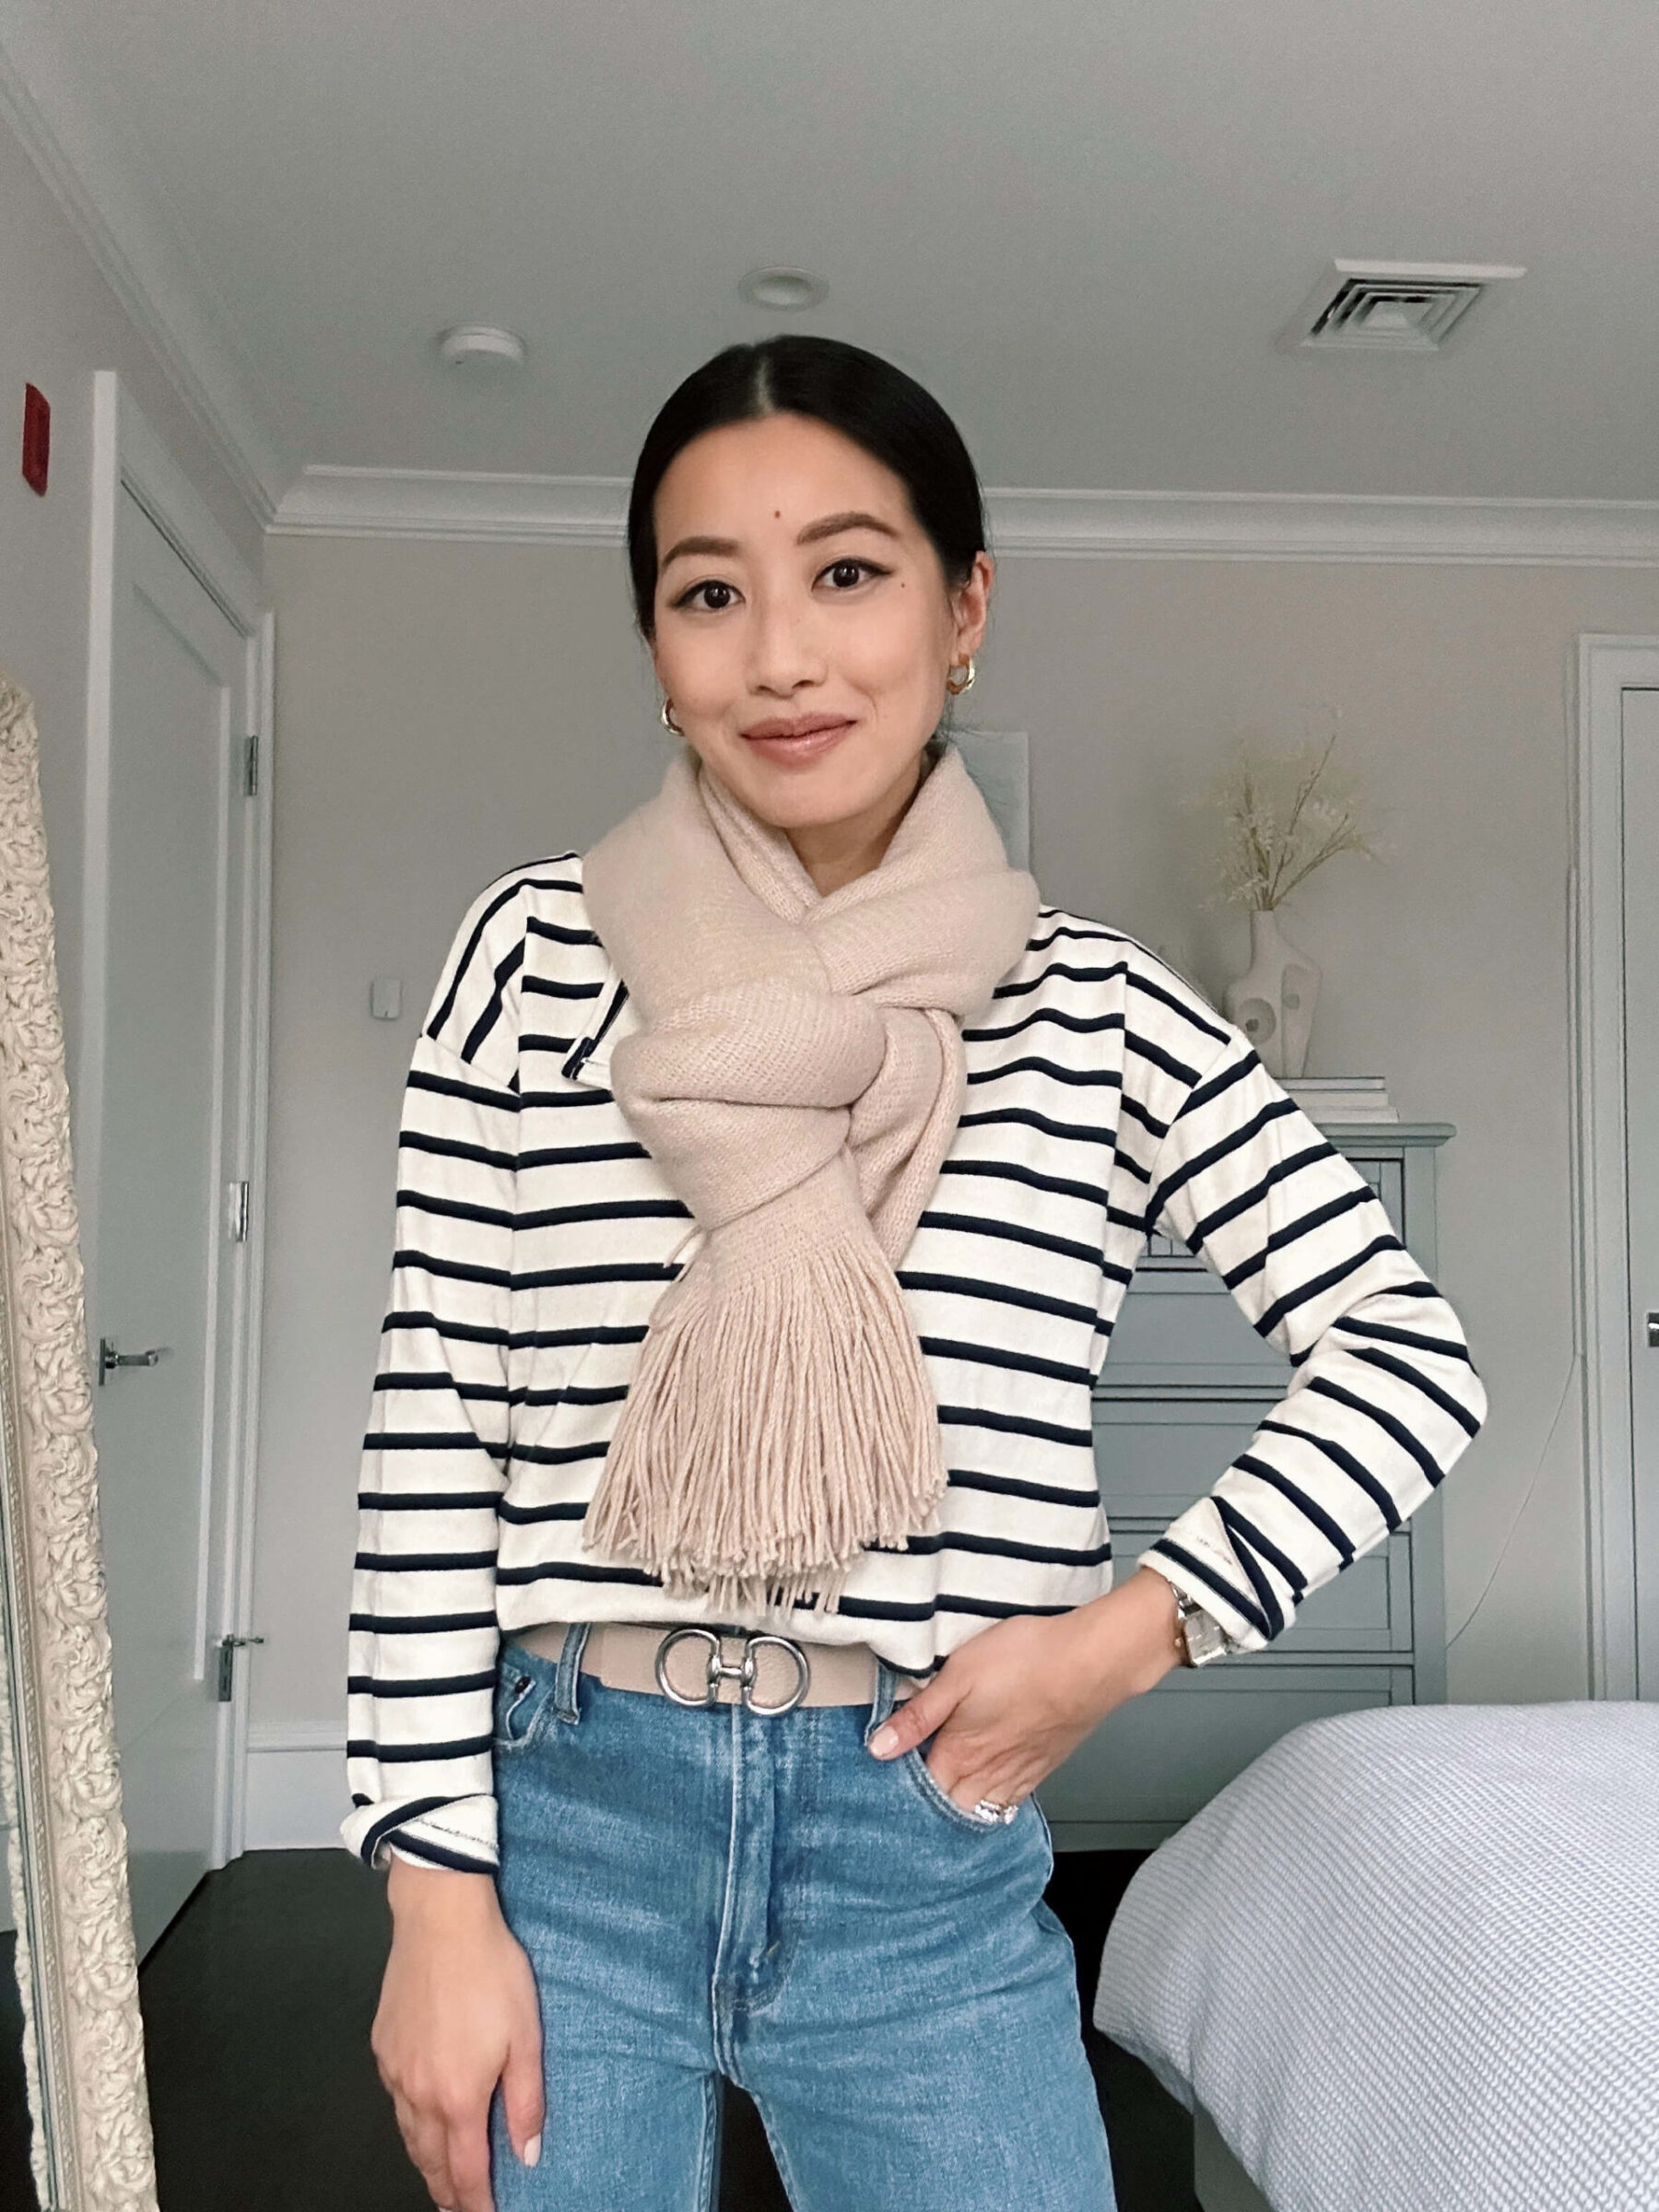 how to style tie a scarf for warm winter outfits